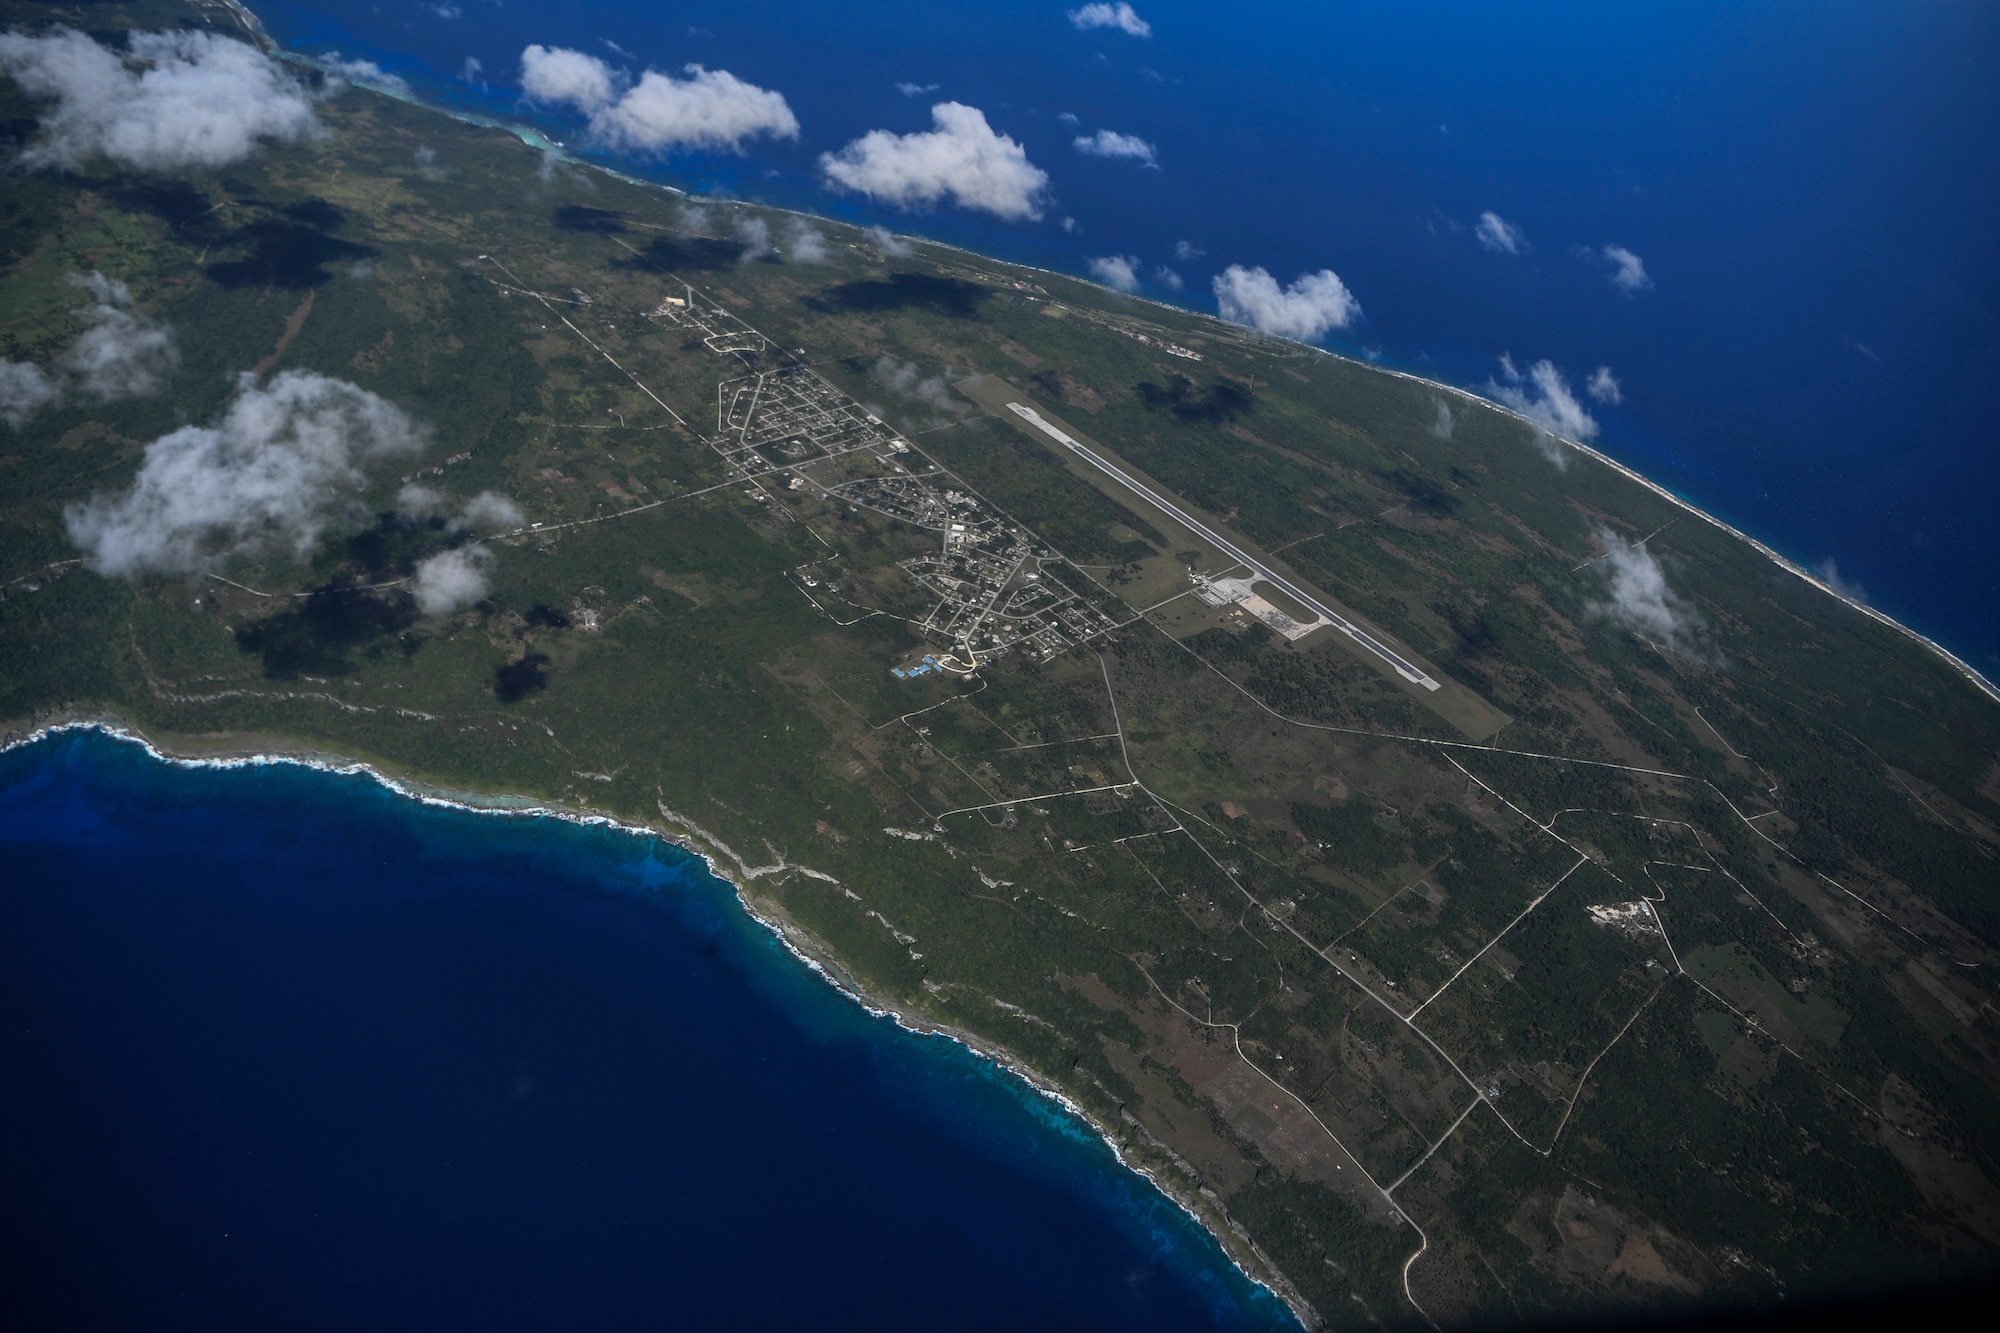 A U.S. Air Force C-130J Super Hercules flies over Tinian, U.S. Commonwealth of the Northern Mariana Islands, during an aeromedical evacuation mission during exercise COPE NORTH 18, Feb. 19.